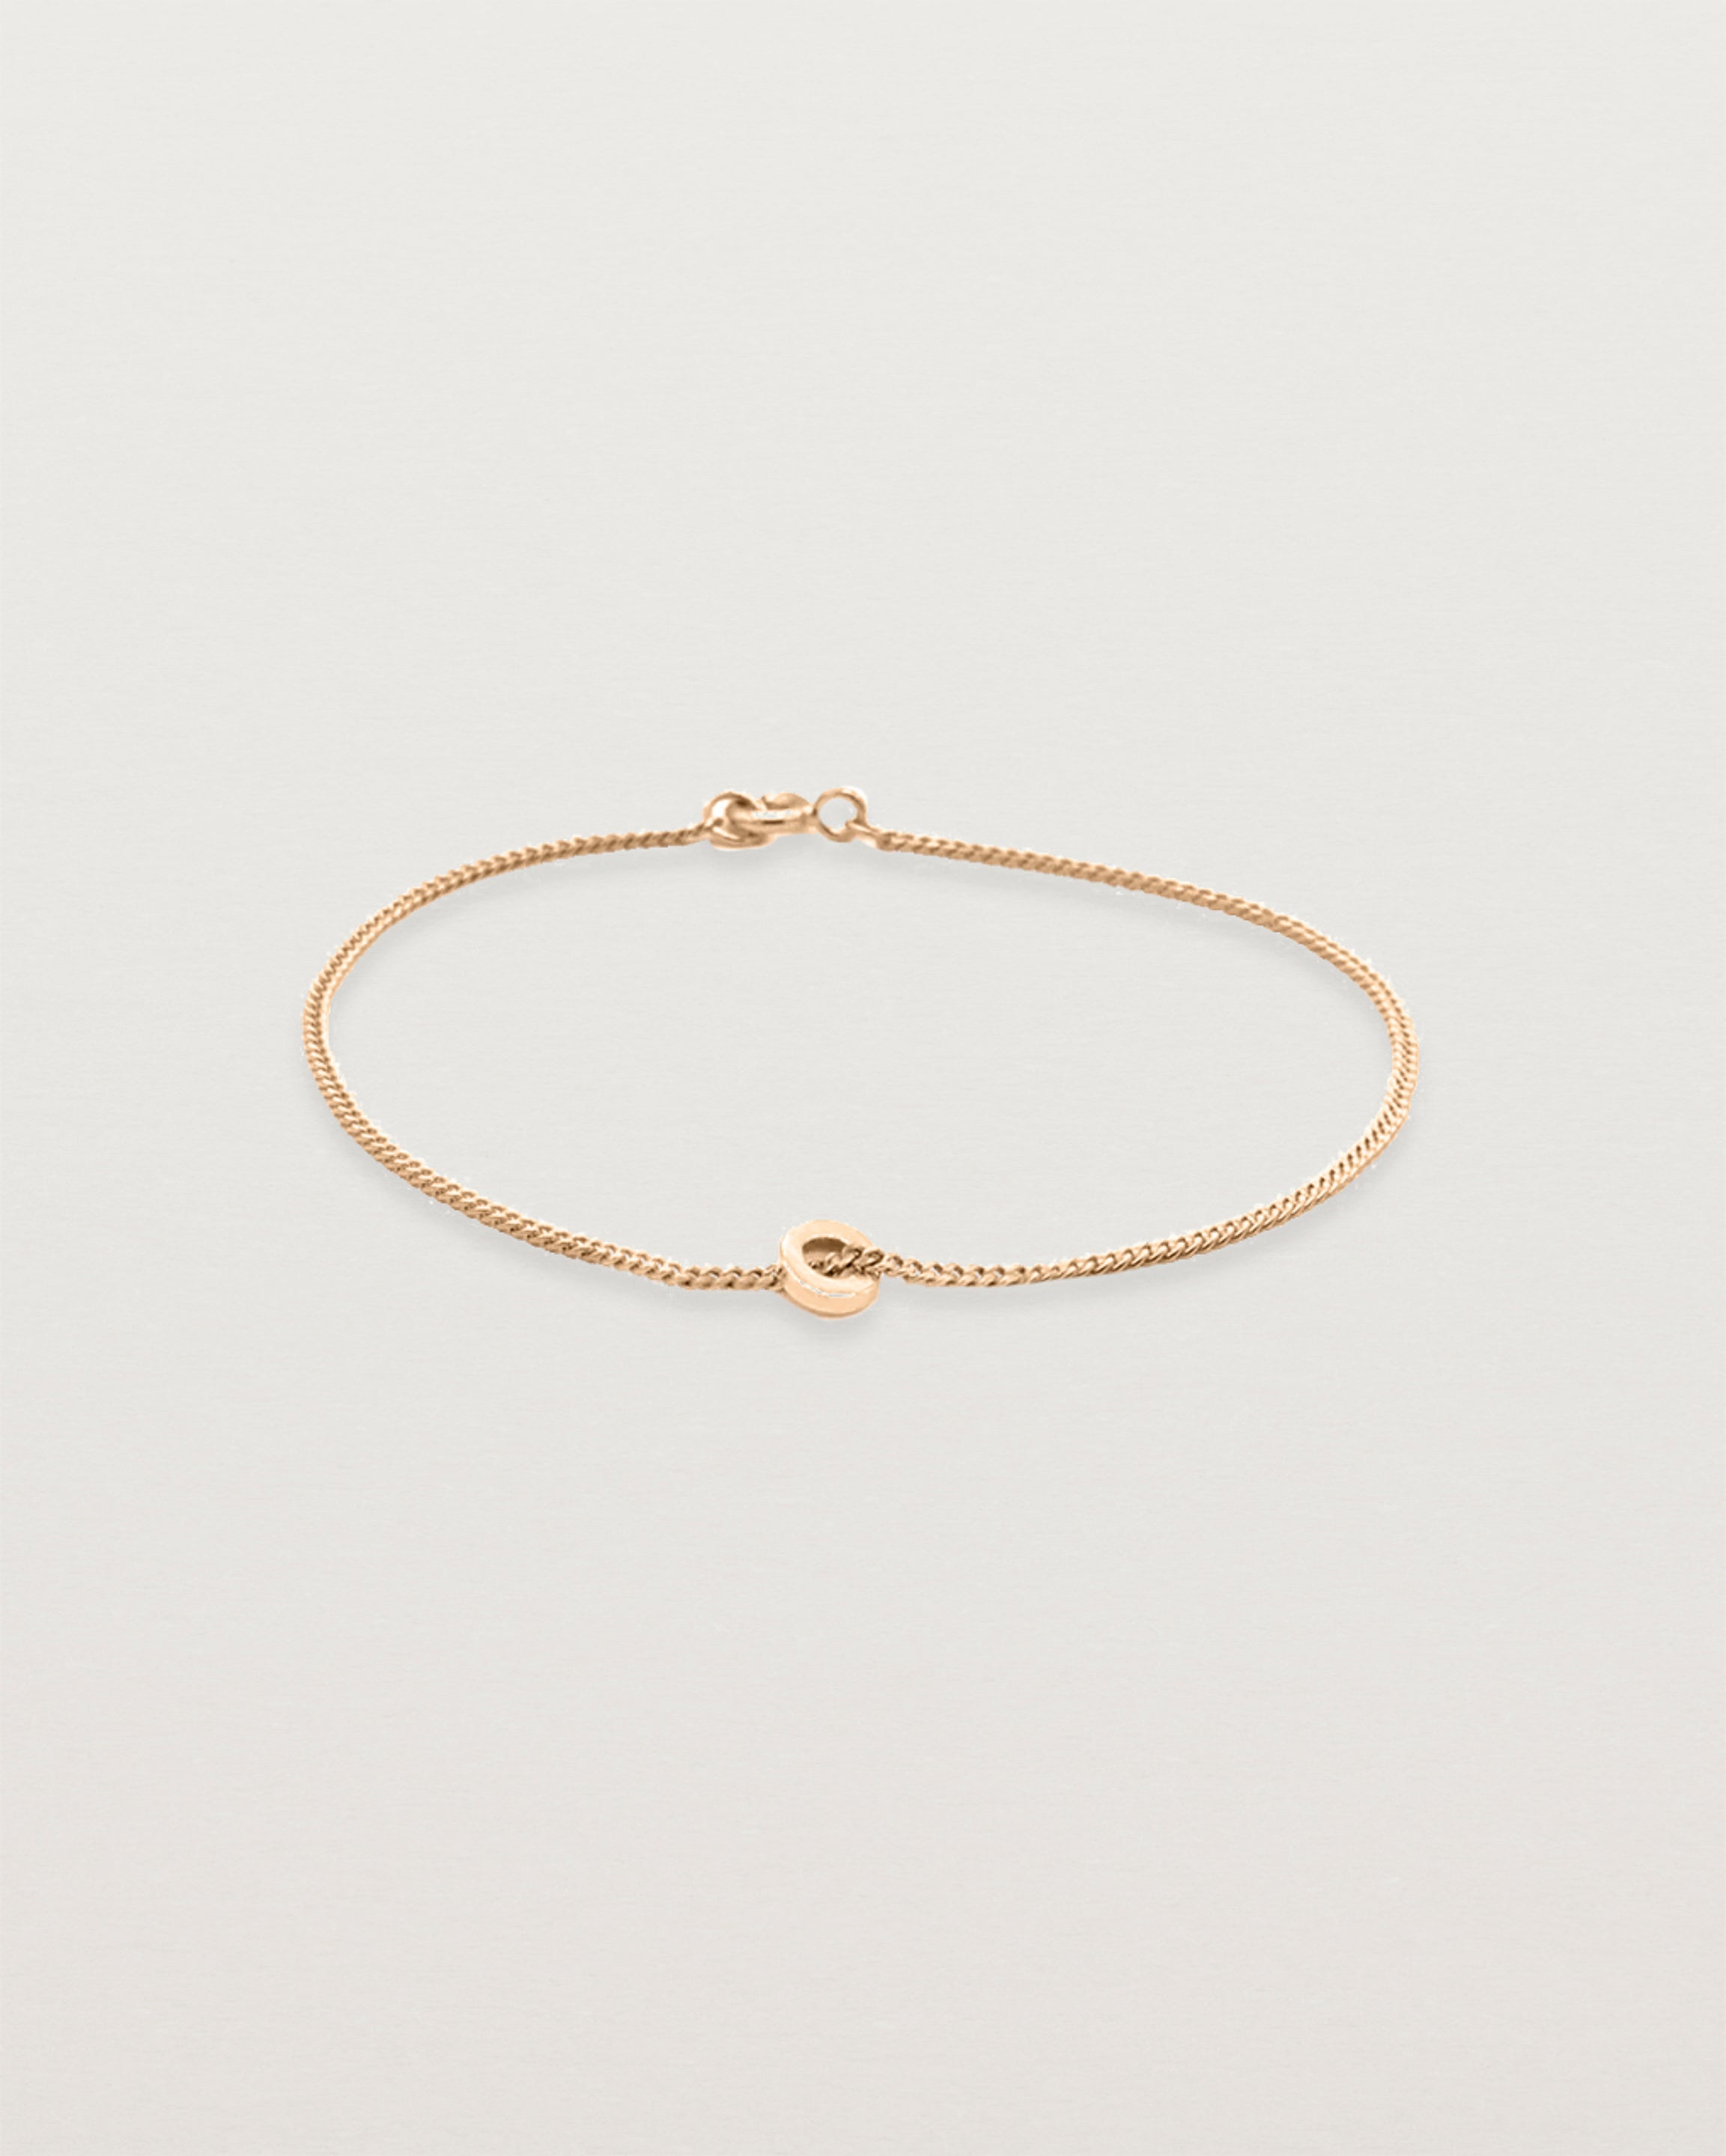 A fine rose gold chain bracelet featuring a rose gold circular charm